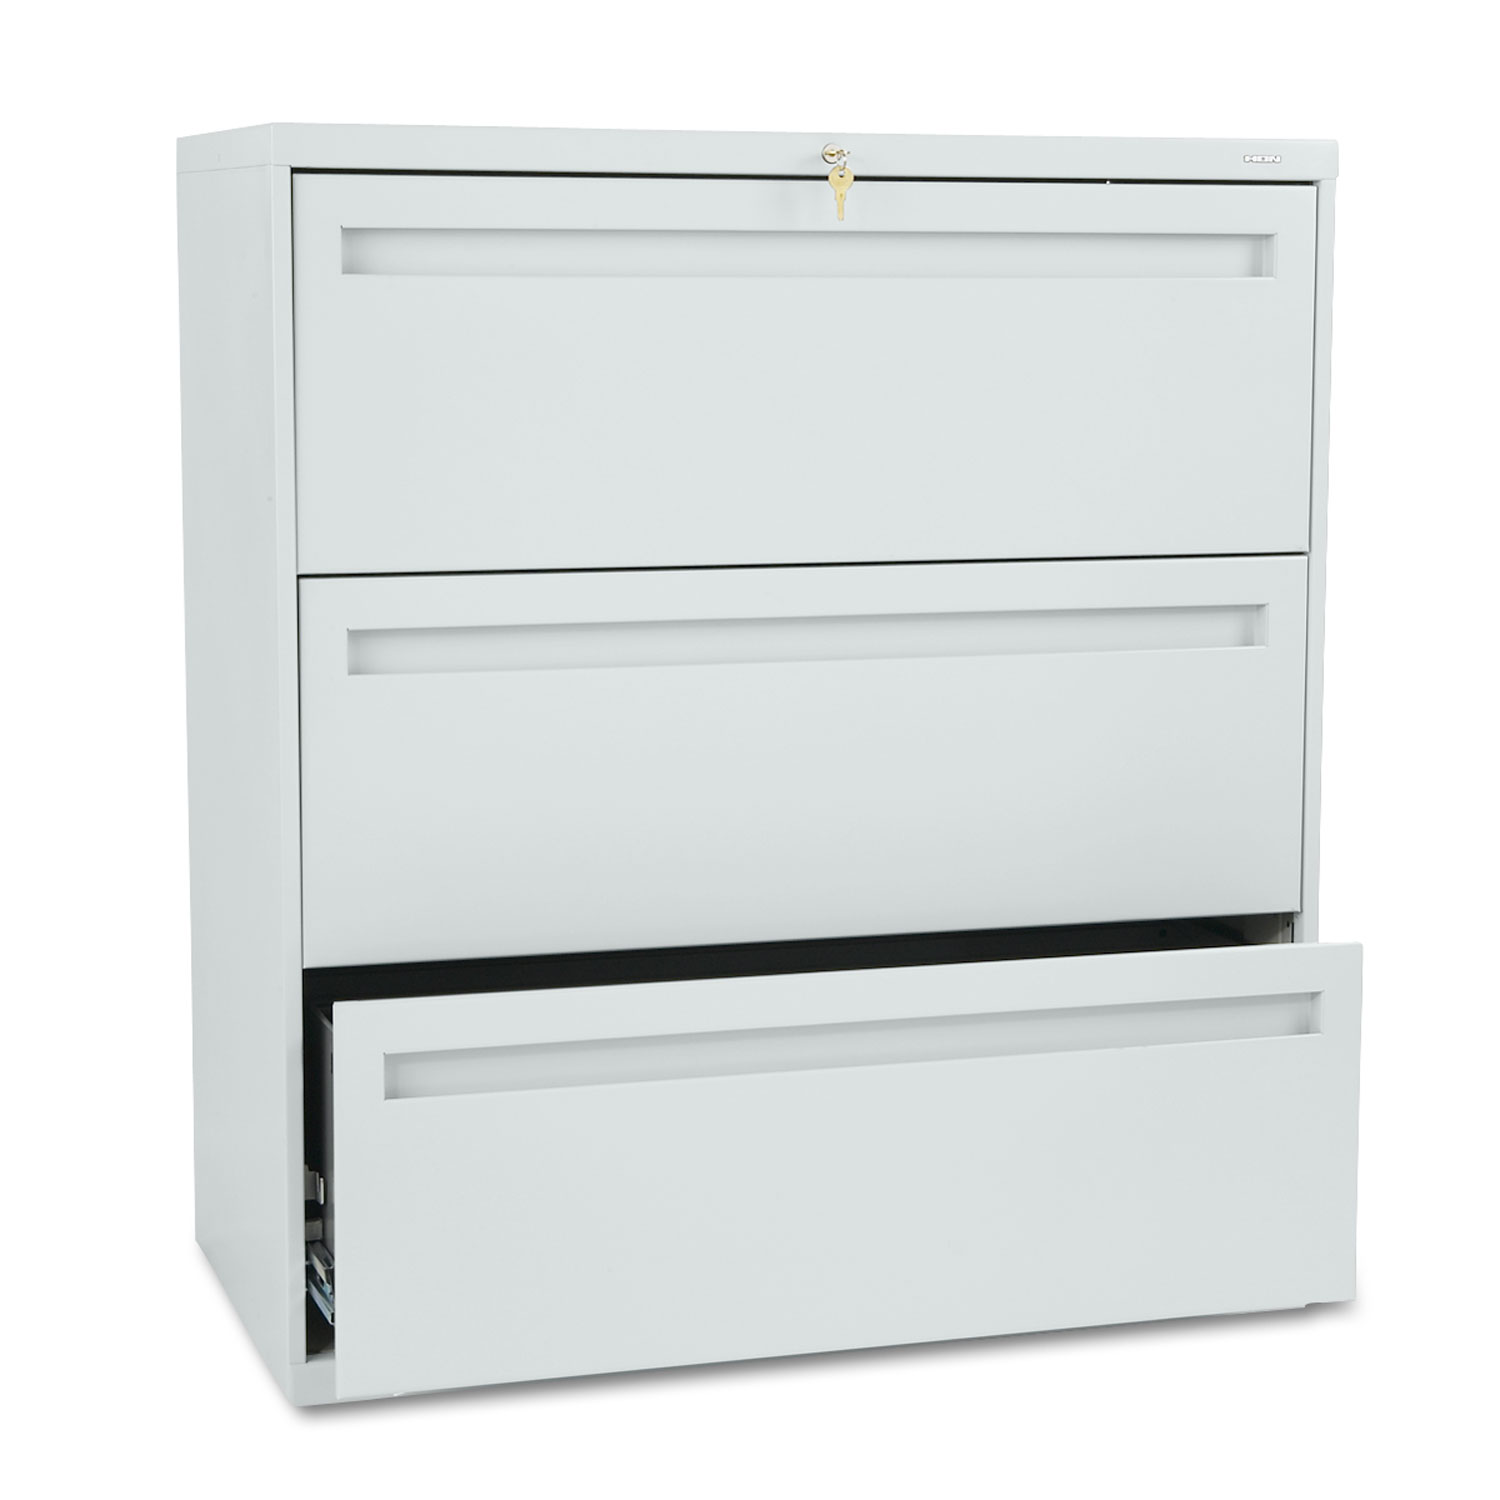 700 Series Three-Drawer Lateral File, 36w x 19-1/4d, Light Gray